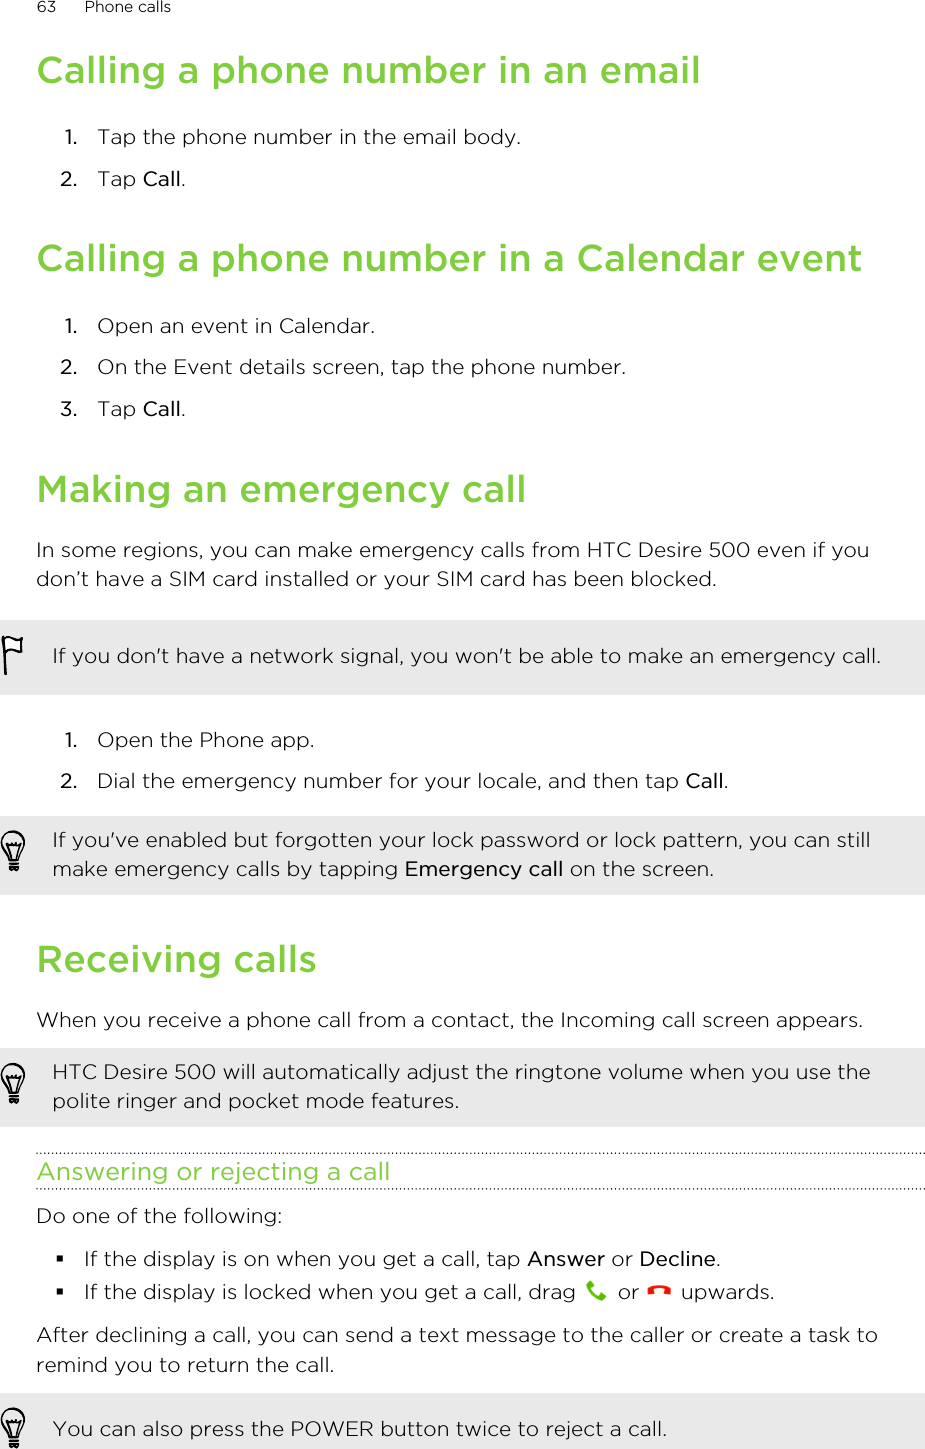 Calling a phone number in an email1. Tap the phone number in the email body.2. Tap Call.Calling a phone number in a Calendar event1. Open an event in Calendar.2. On the Event details screen, tap the phone number.3. Tap Call.Making an emergency callIn some regions, you can make emergency calls from HTC Desire 500 even if youdon’t have a SIM card installed or your SIM card has been blocked.If you don&apos;t have a network signal, you won&apos;t be able to make an emergency call.1. Open the Phone app.2. Dial the emergency number for your locale, and then tap Call.If you&apos;ve enabled but forgotten your lock password or lock pattern, you can stillmake emergency calls by tapping Emergency call on the screen.Receiving callsWhen you receive a phone call from a contact, the Incoming call screen appears.HTC Desire 500 will automatically adjust the ringtone volume when you use thepolite ringer and pocket mode features.Answering or rejecting a callDo one of the following:§If the display is on when you get a call, tap Answer or Decline.§If the display is locked when you get a call, drag   or   upwards.After declining a call, you can send a text message to the caller or create a task toremind you to return the call.You can also press the POWER button twice to reject a call.63 Phone calls